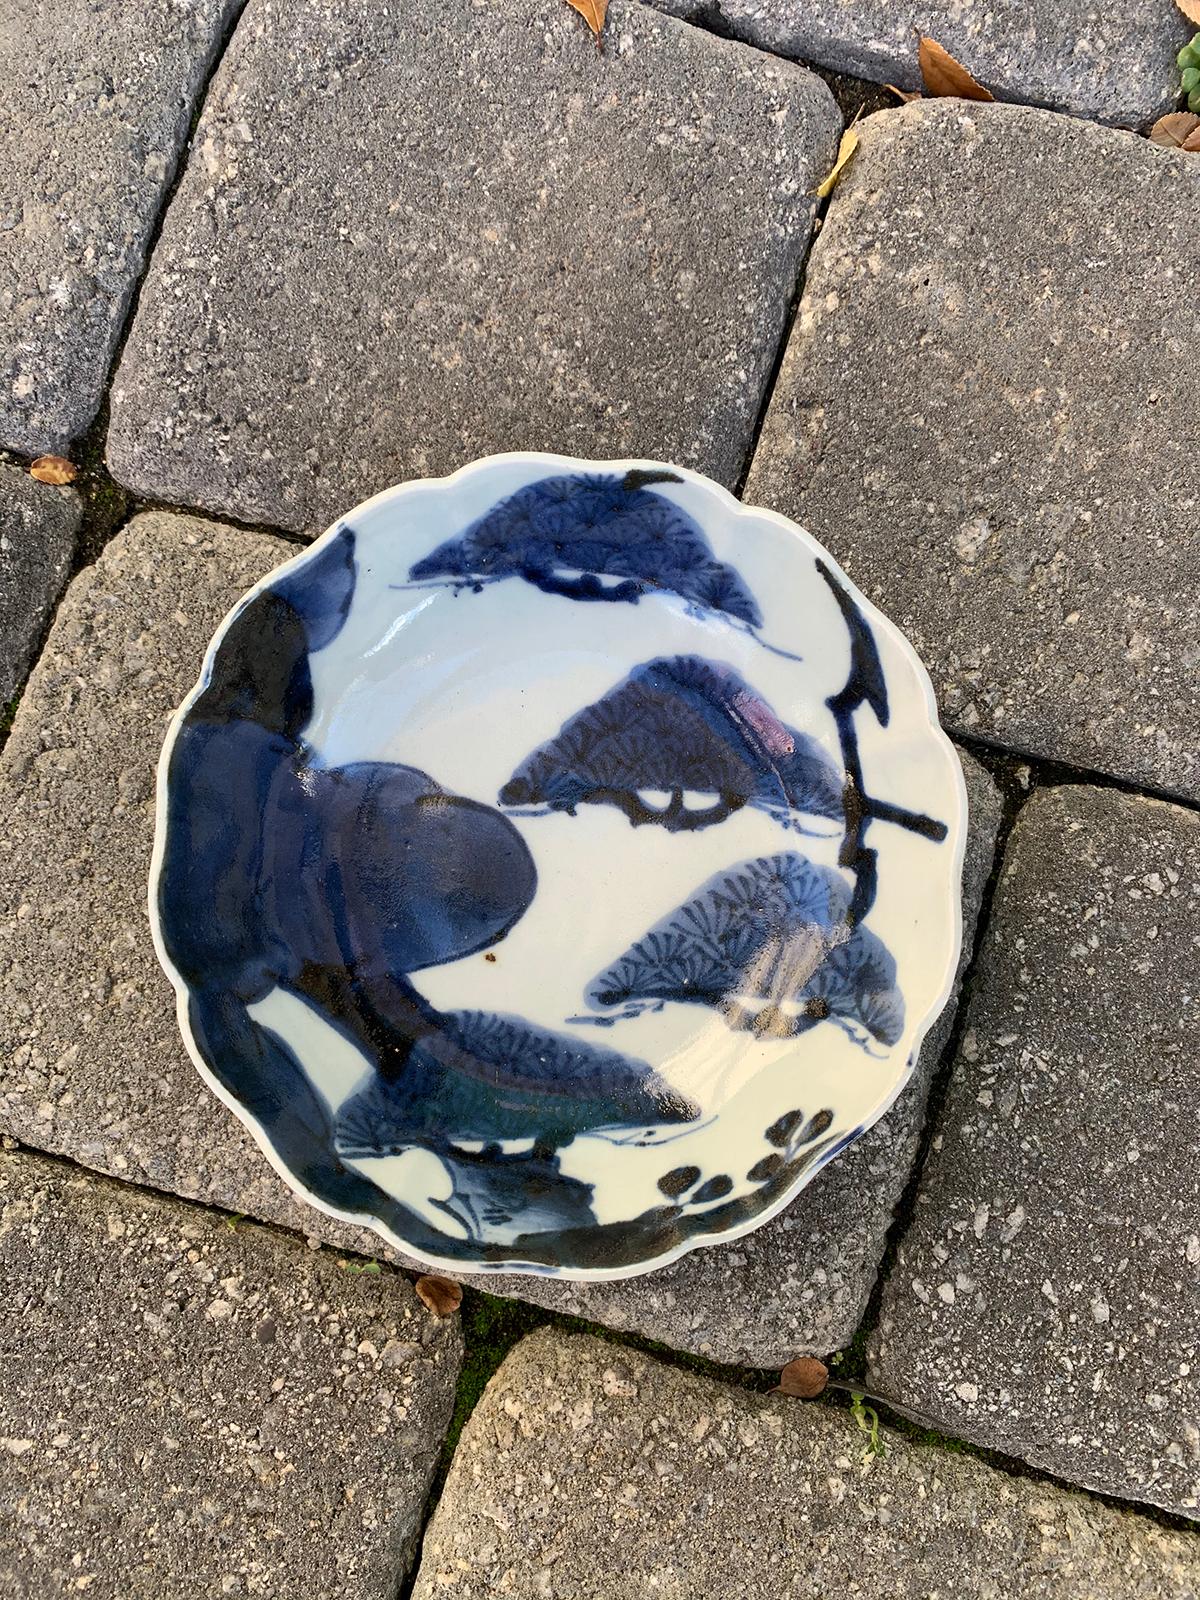 19th century Chinese blue and white porcelain bowl with scalloped edge and bonsai tree pattern.